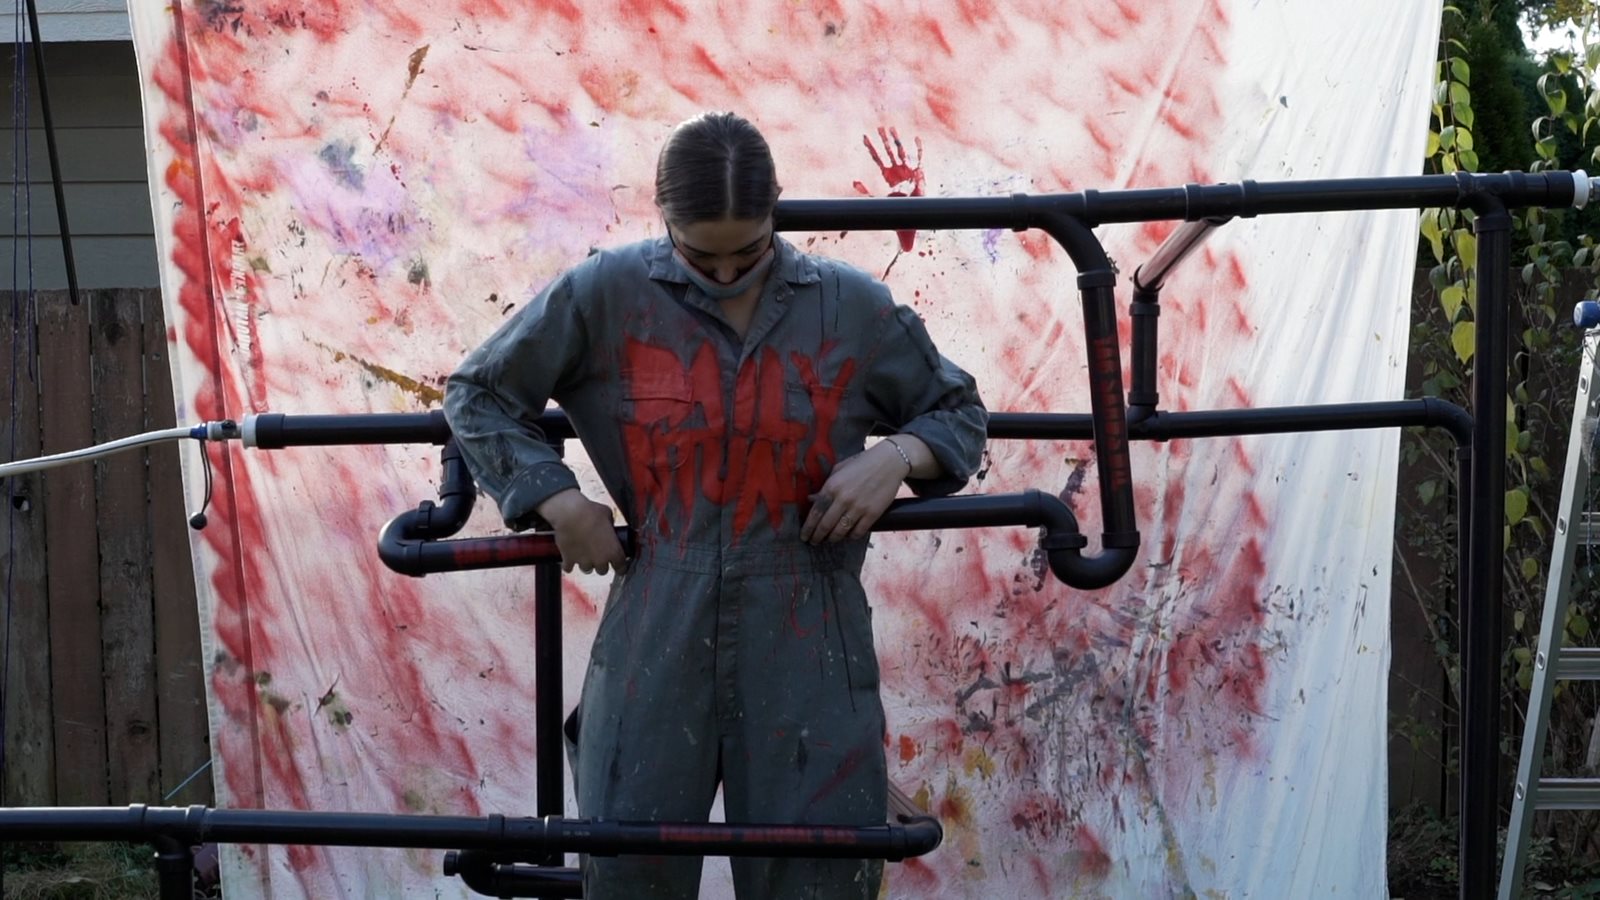 still from Broken Promises showing a person in coveralls standing on scaffolding in front of a painted background